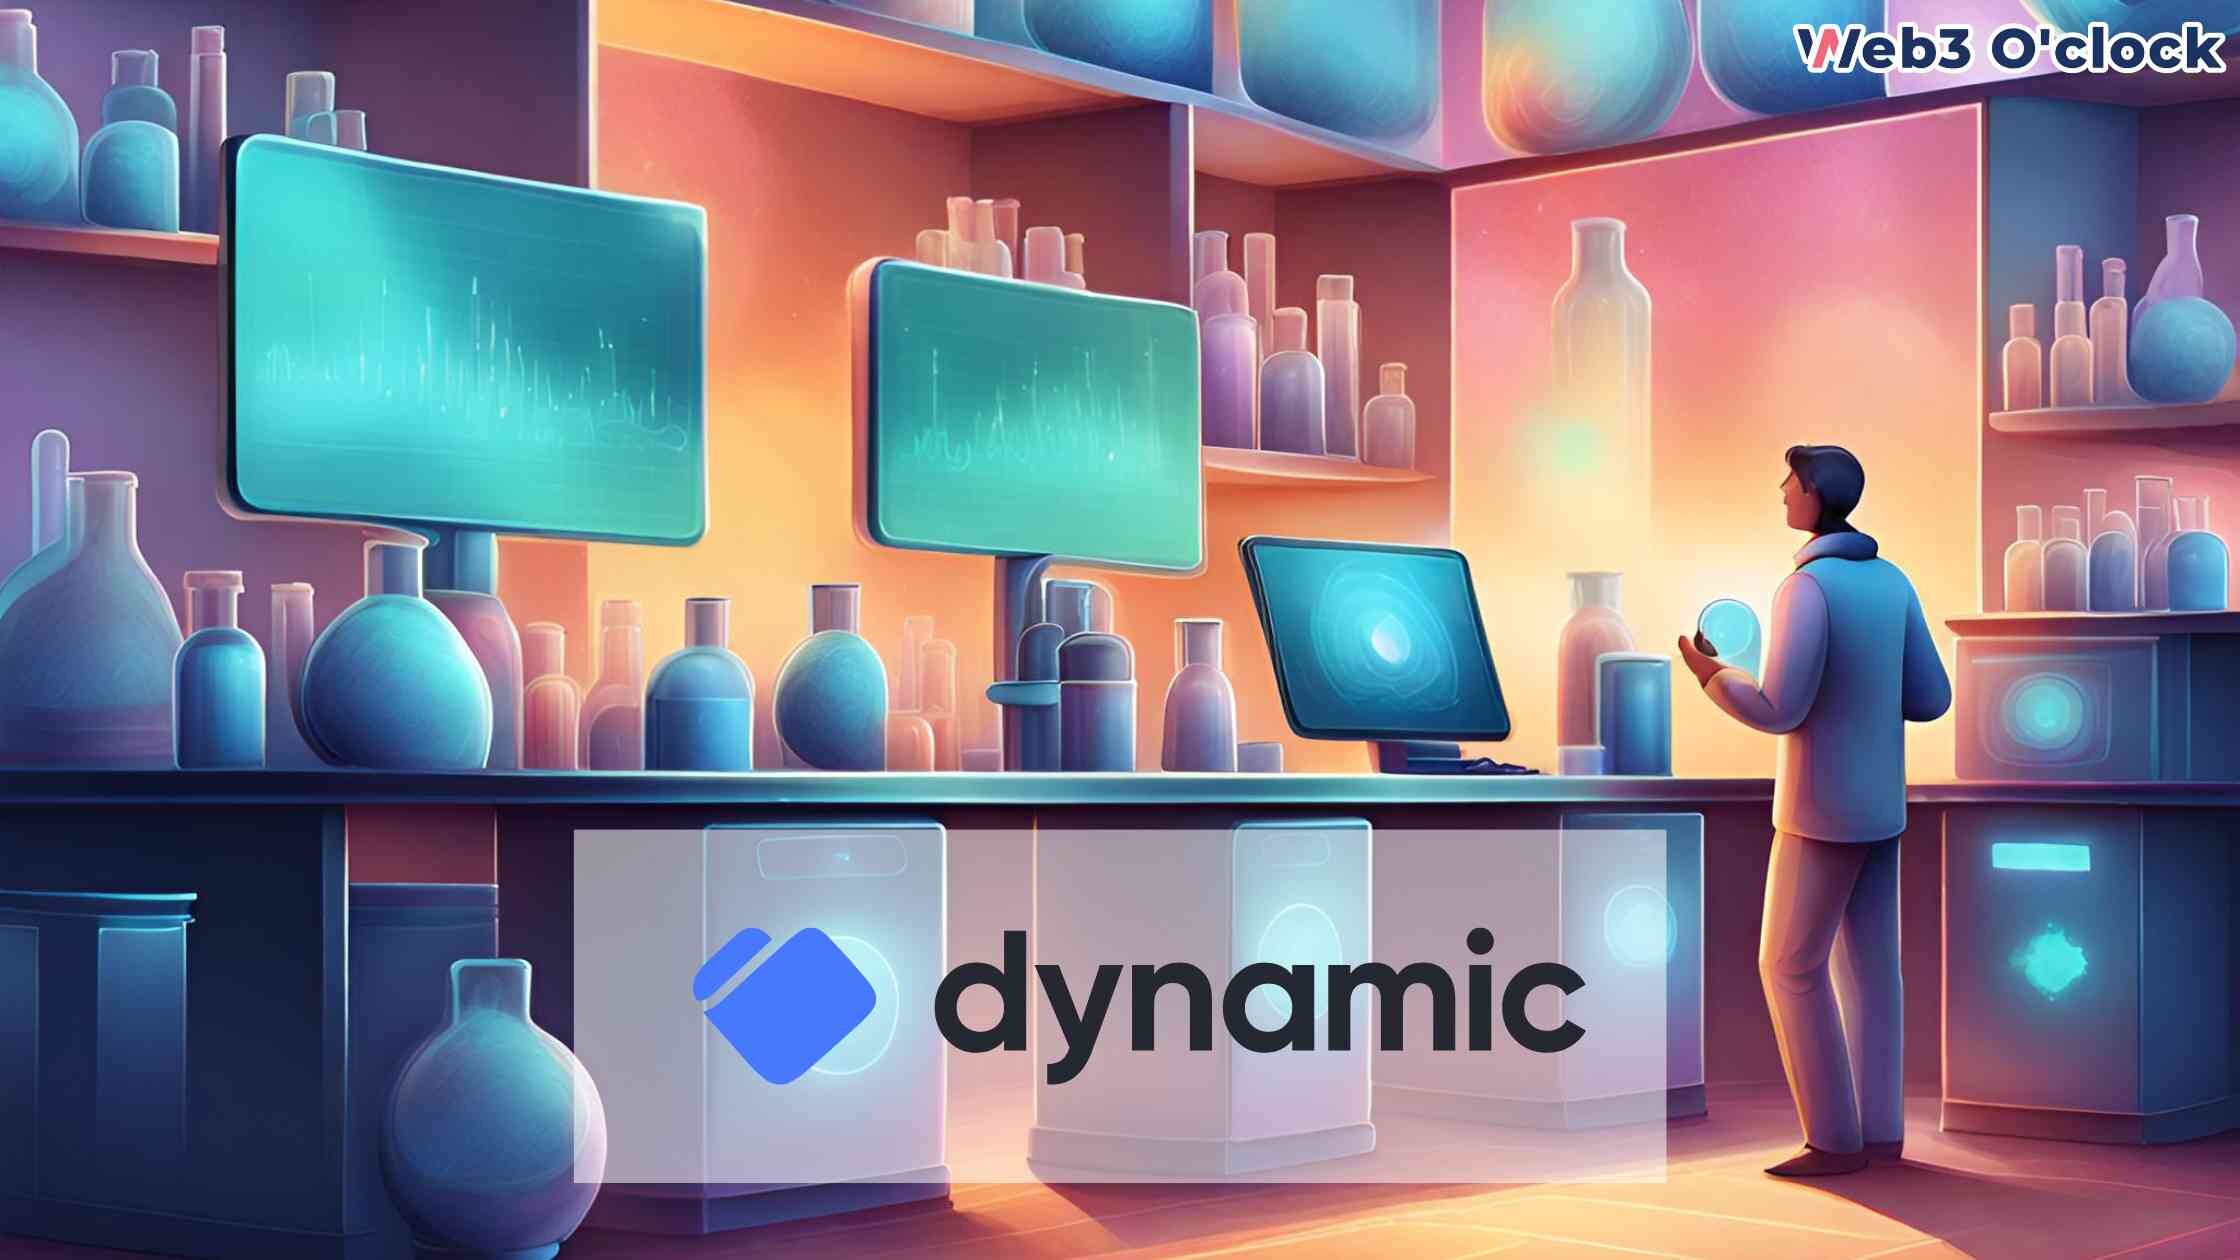 Dynamic Labs Secures $13.5 Million funding by Web3 O' clock